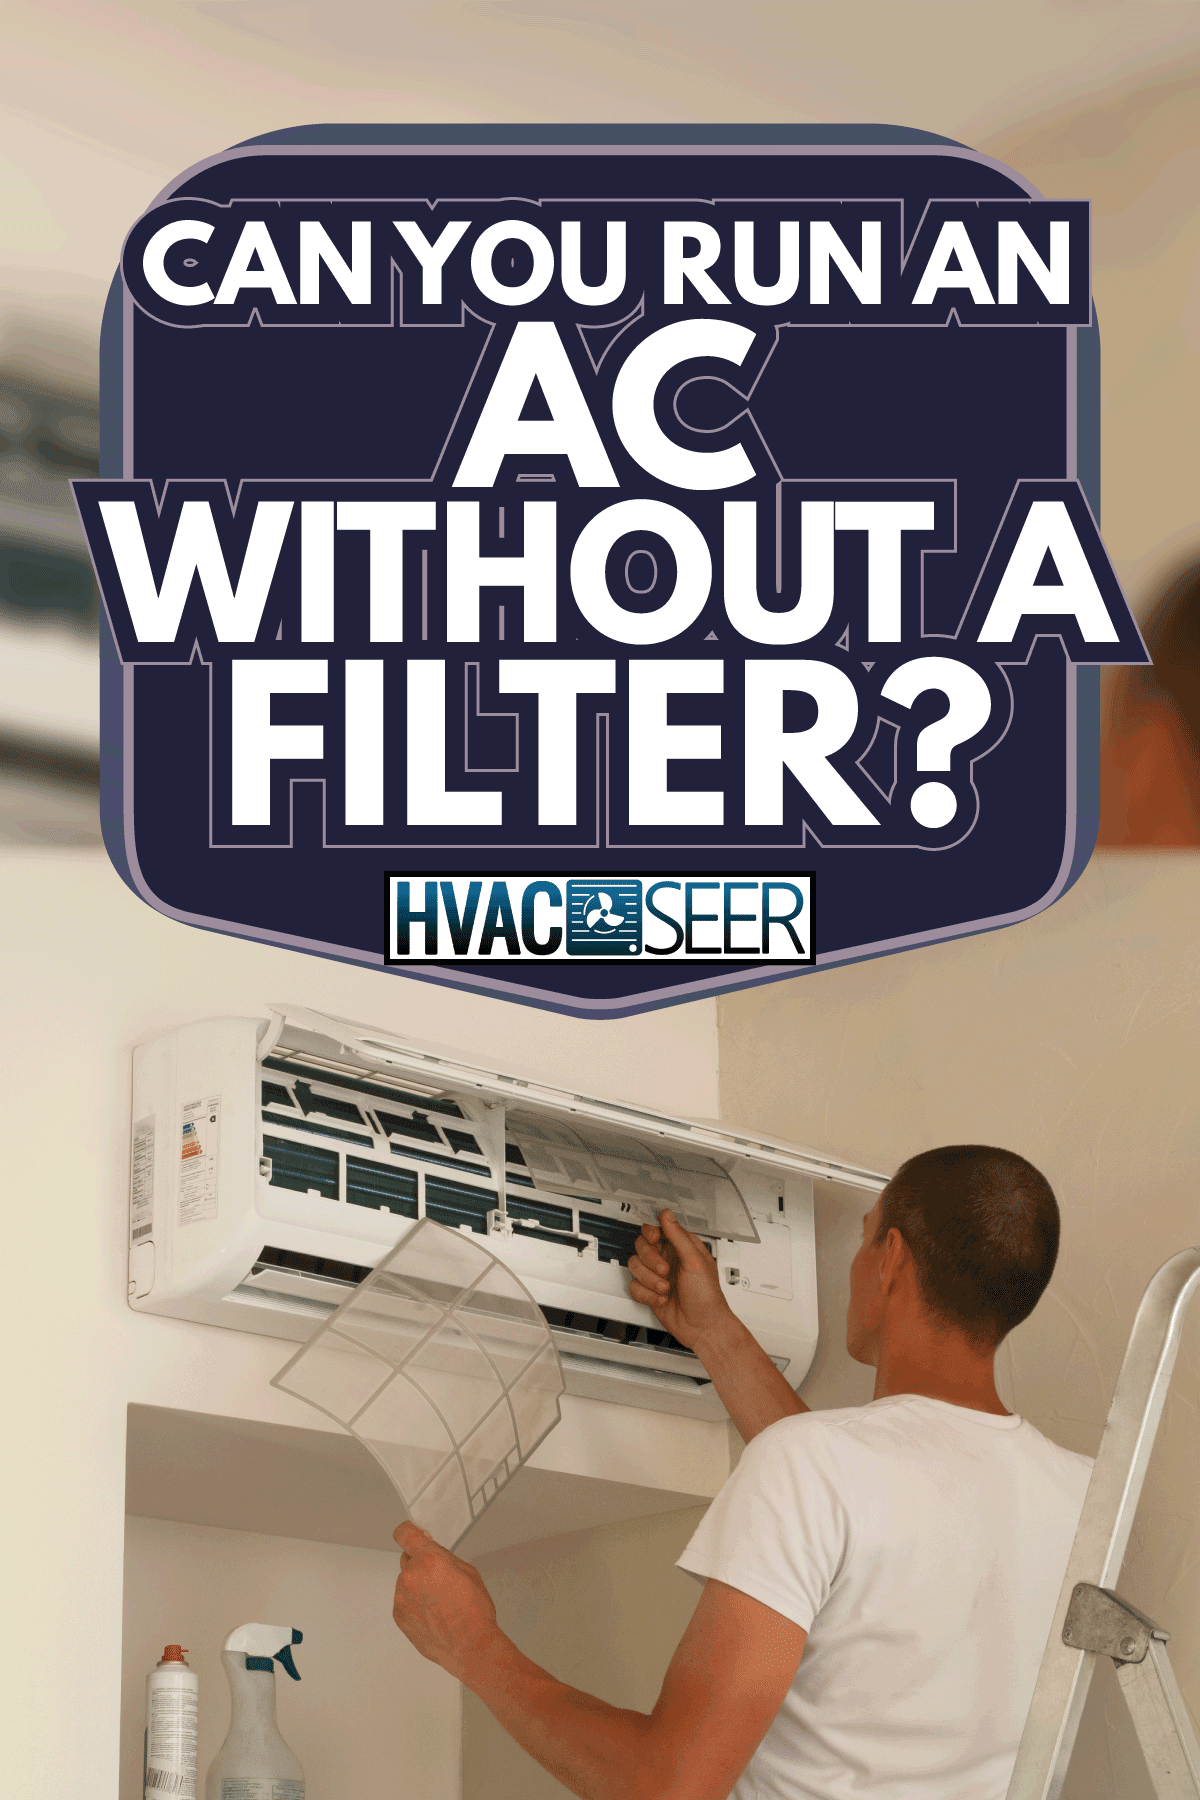 Cleaning the air conditioner. Can You Run An AC Without A Filter